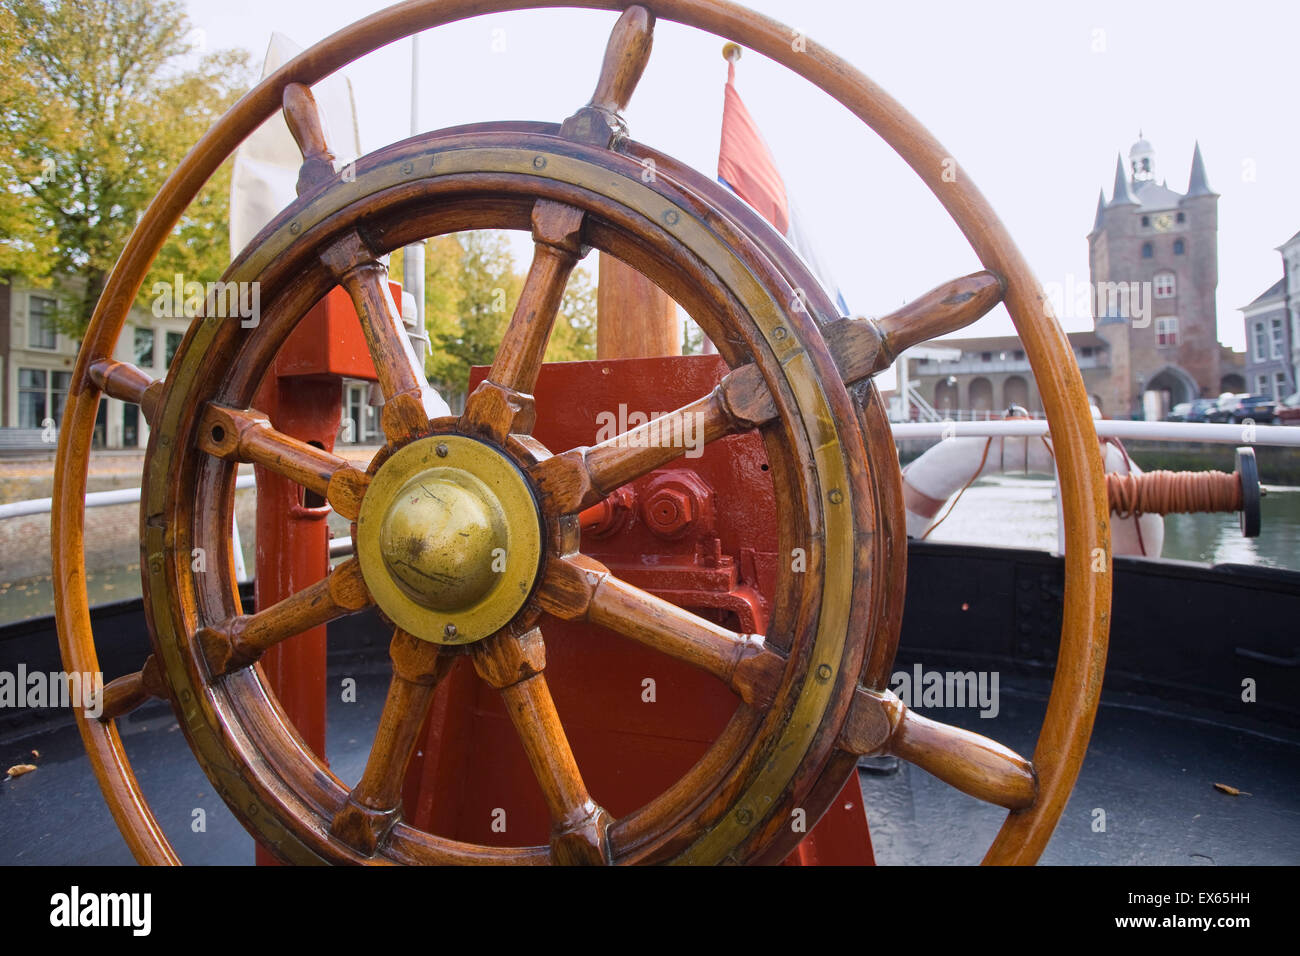 Europe, Netherlands, Zeeland, the wheel of an old sail boat at the old harbor in Zierikzee on the peninsula Schouwen-Duiveland,  Stock Photo